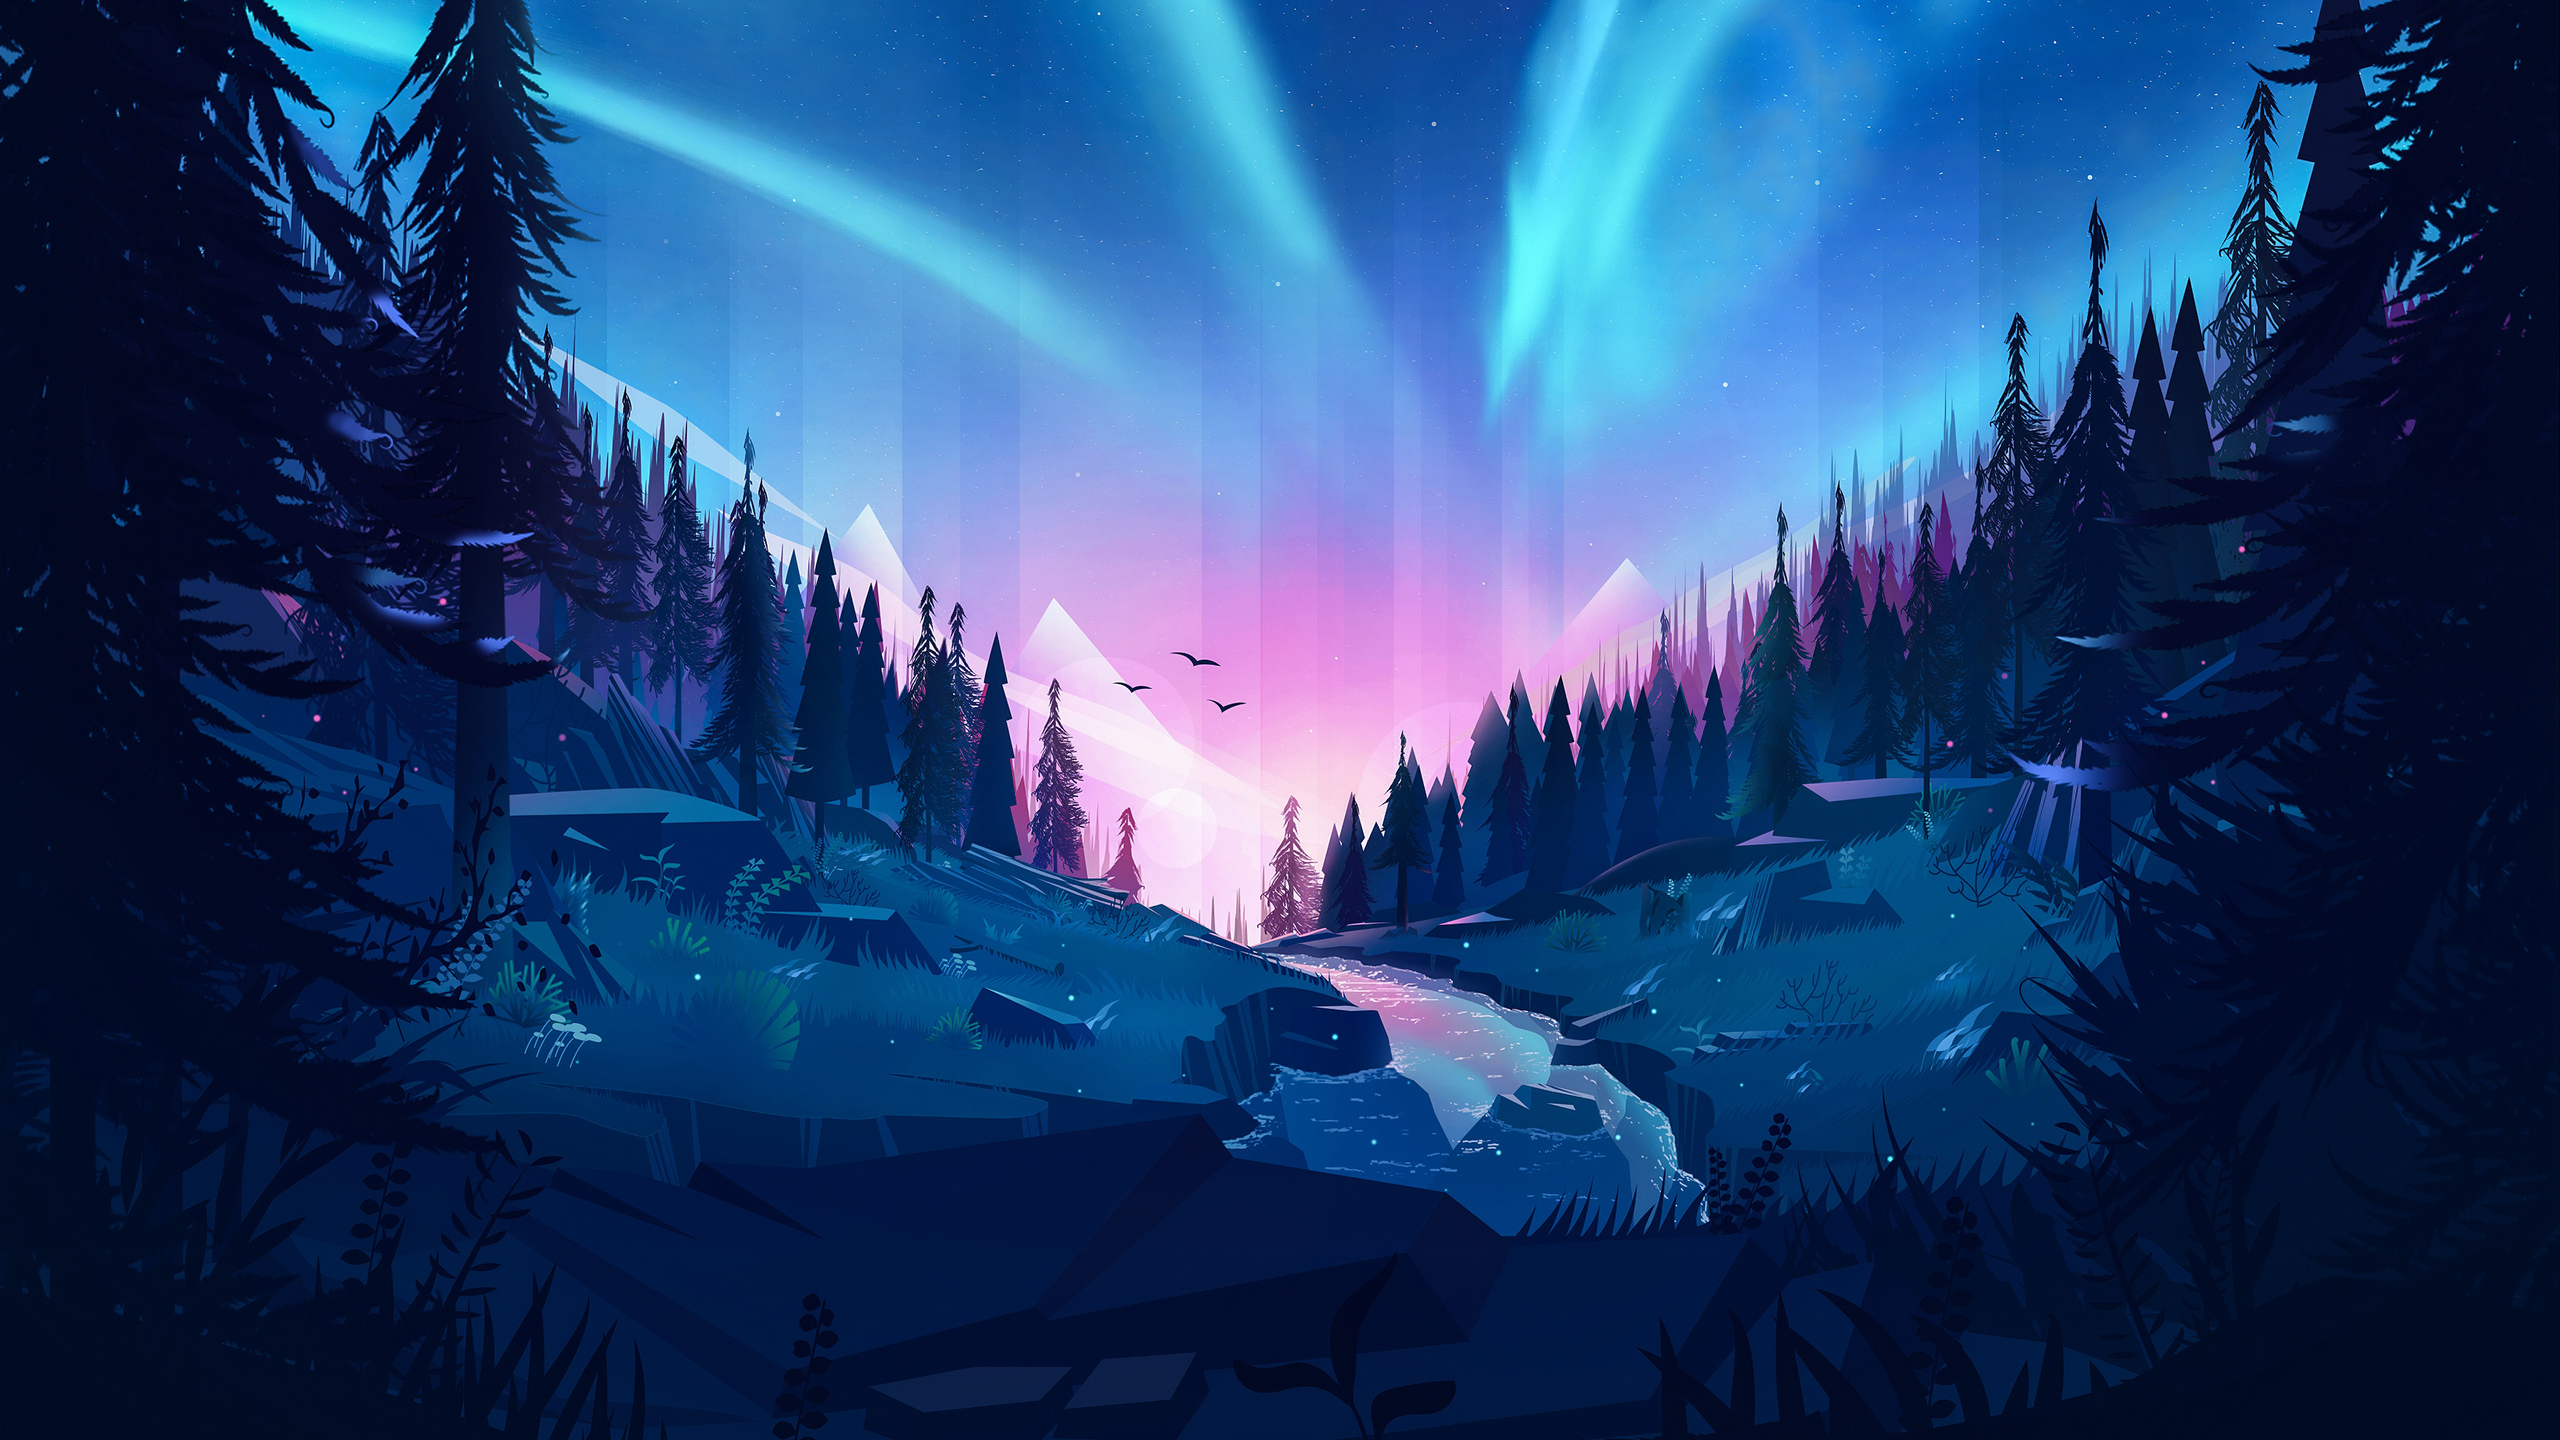 2560x1440 Auroral Forest 4k Illustration 1440p Resolution Hd 4k Wallpapers Images Backgrounds Photos And Pictures